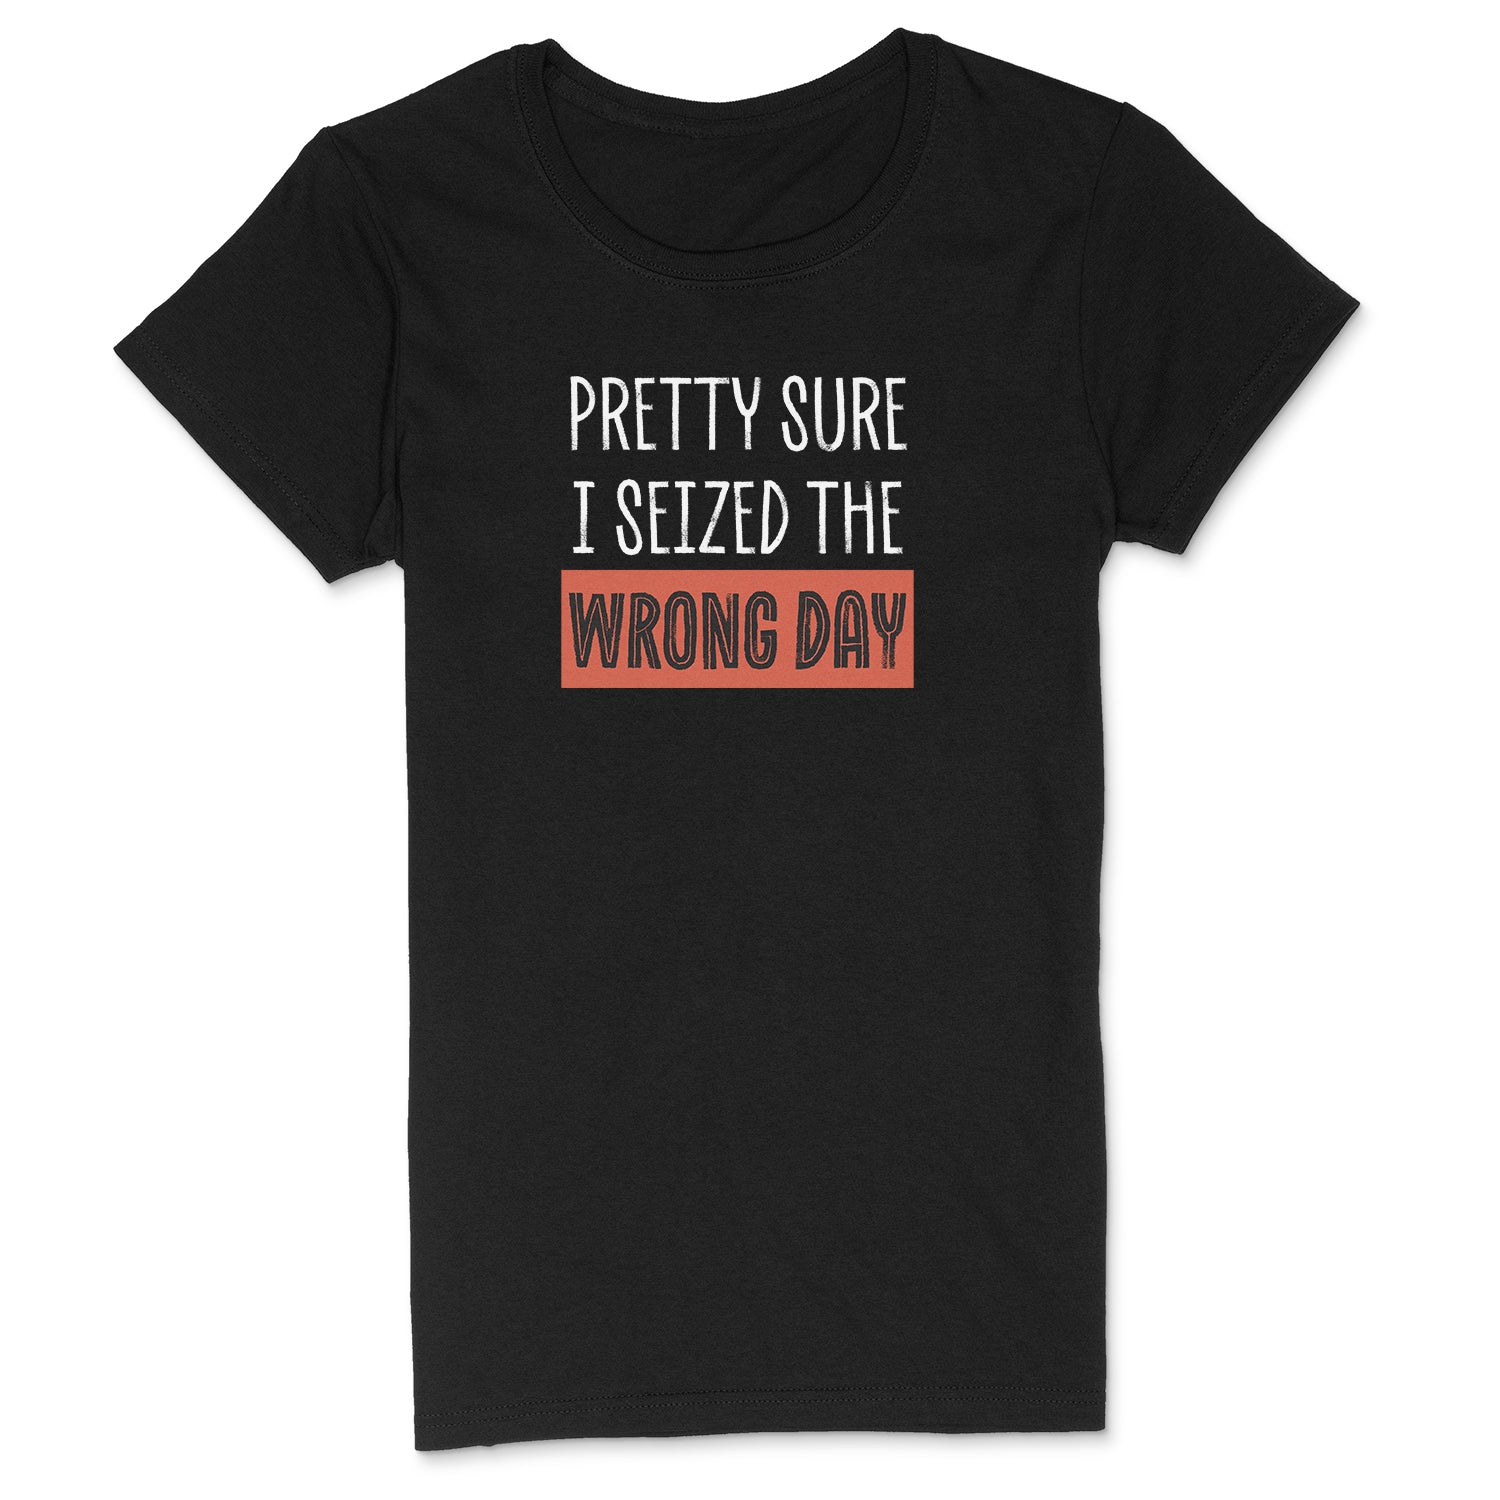 "Seized The Wrong Day" Premium Midweight Ringspun Cotton T-Shirt - Mens/Womens Fits